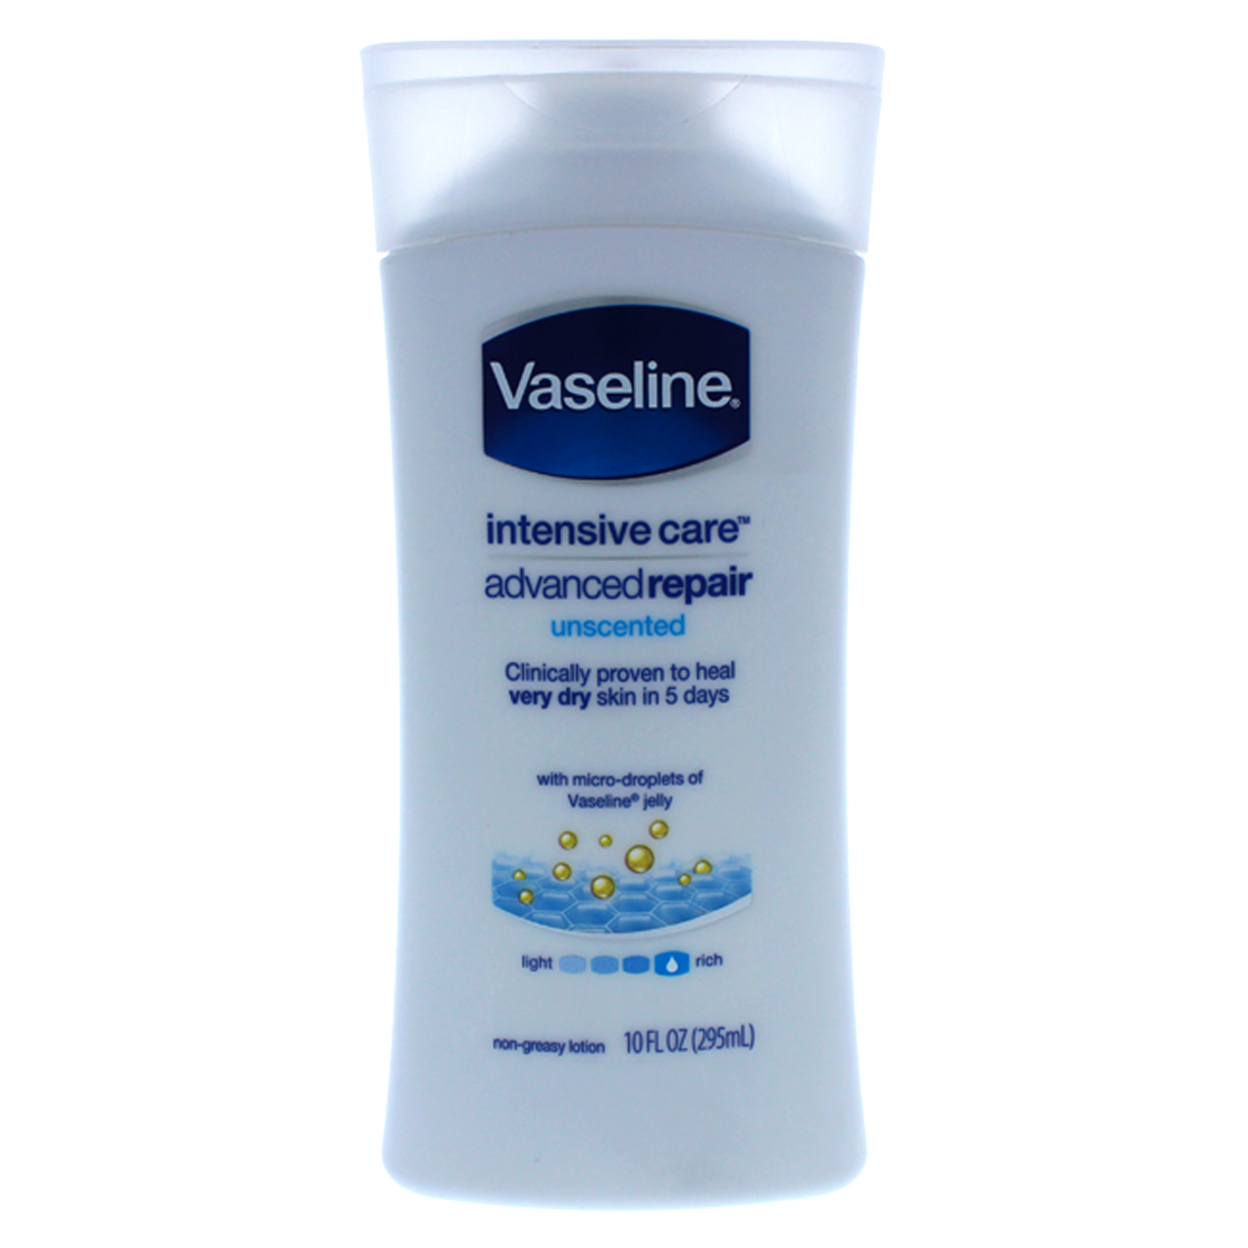 Vaseline hand and body lotion Advanced Repair Unscented 10 oz - image 1 of 3